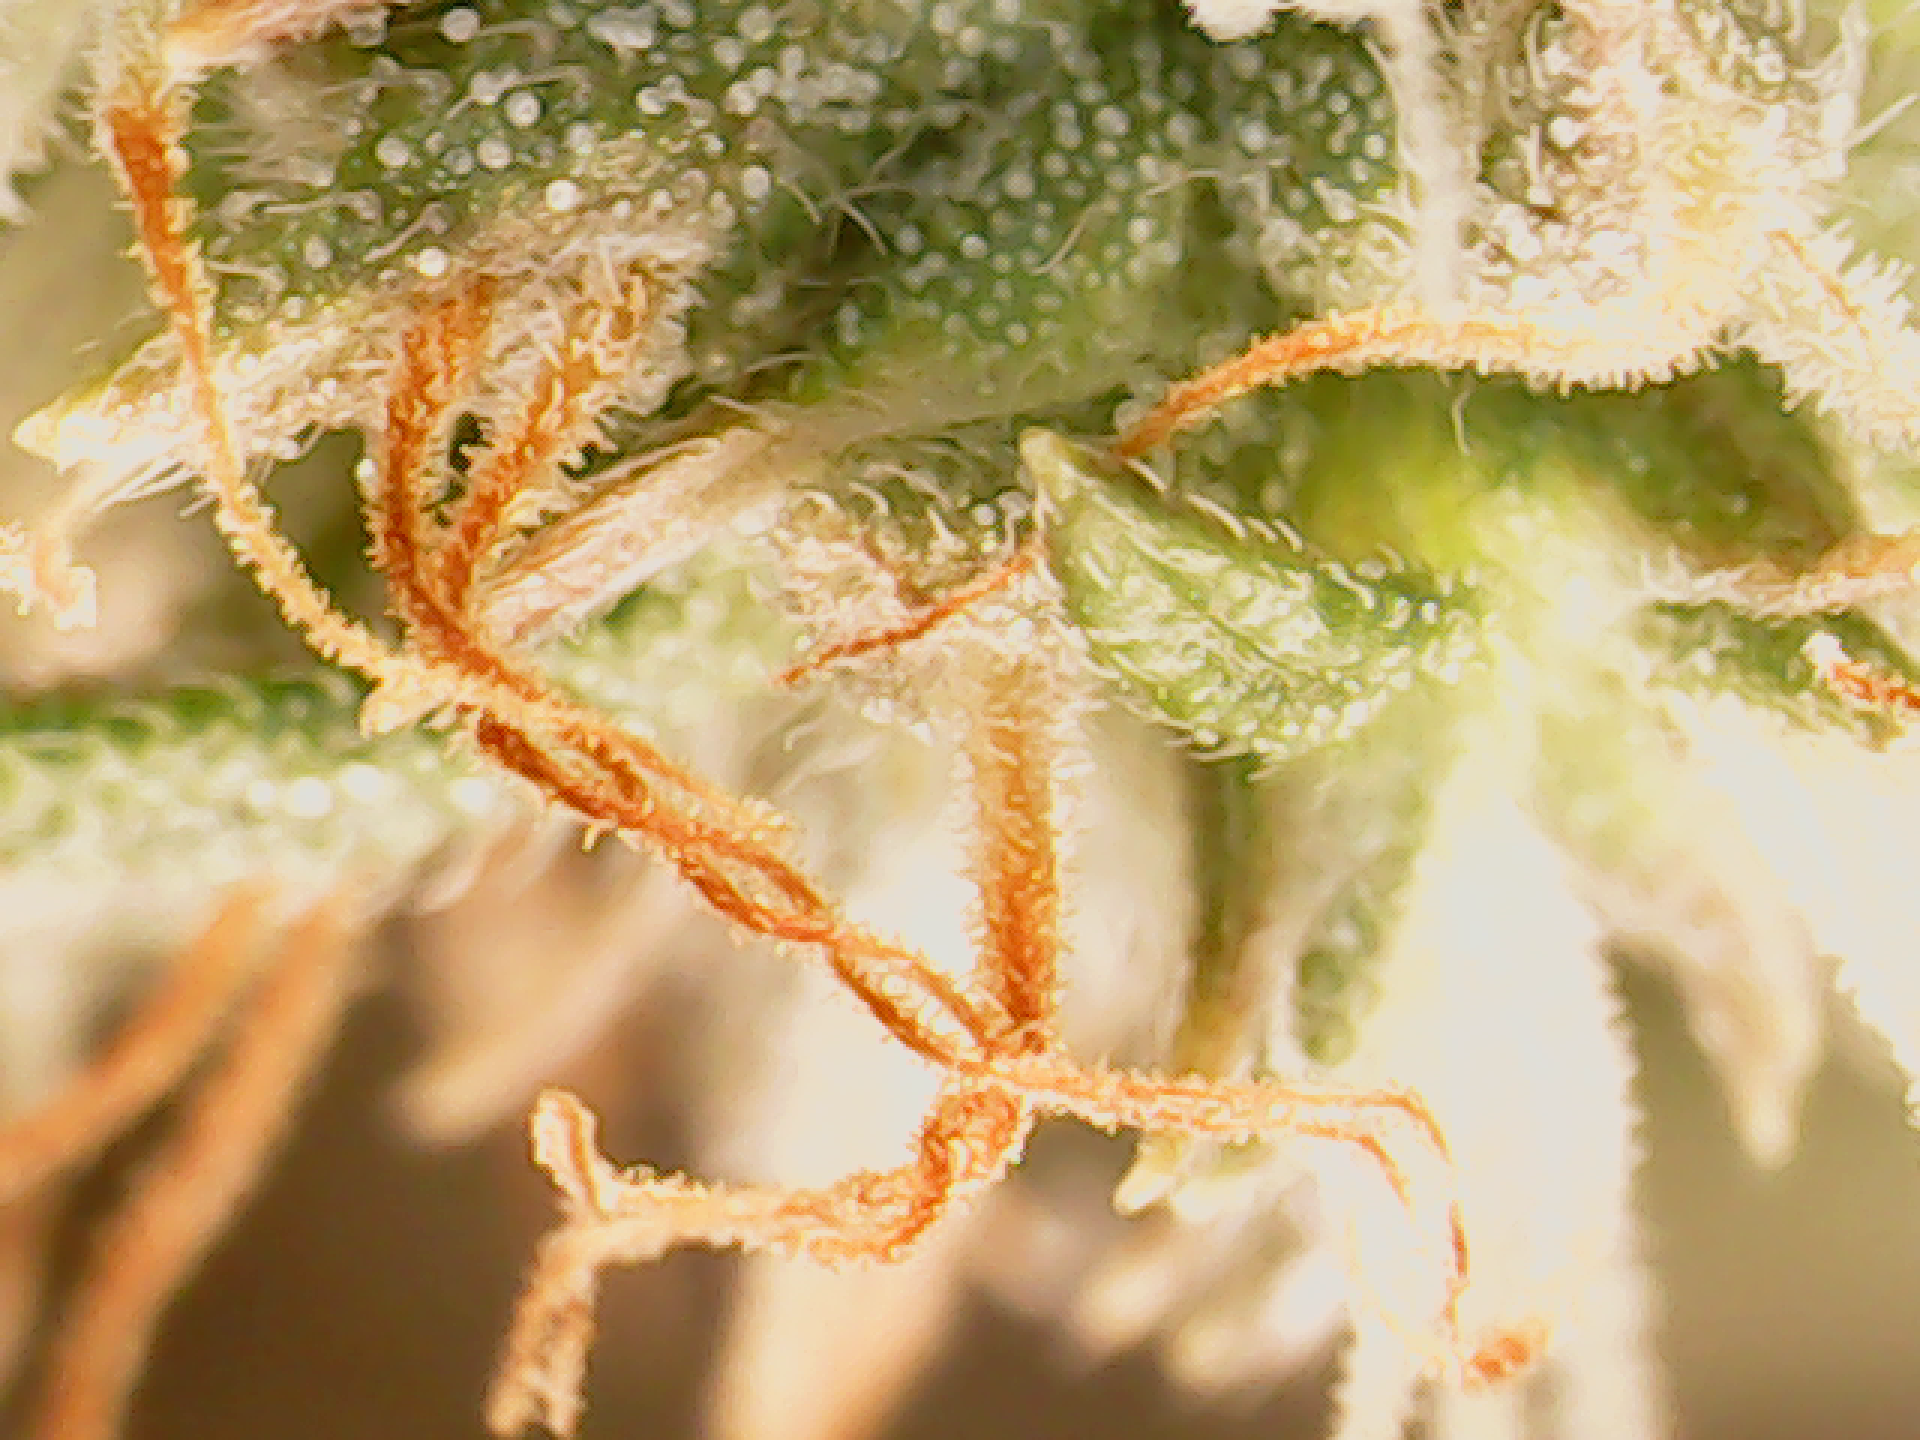 Ready for harvest trichome check 2